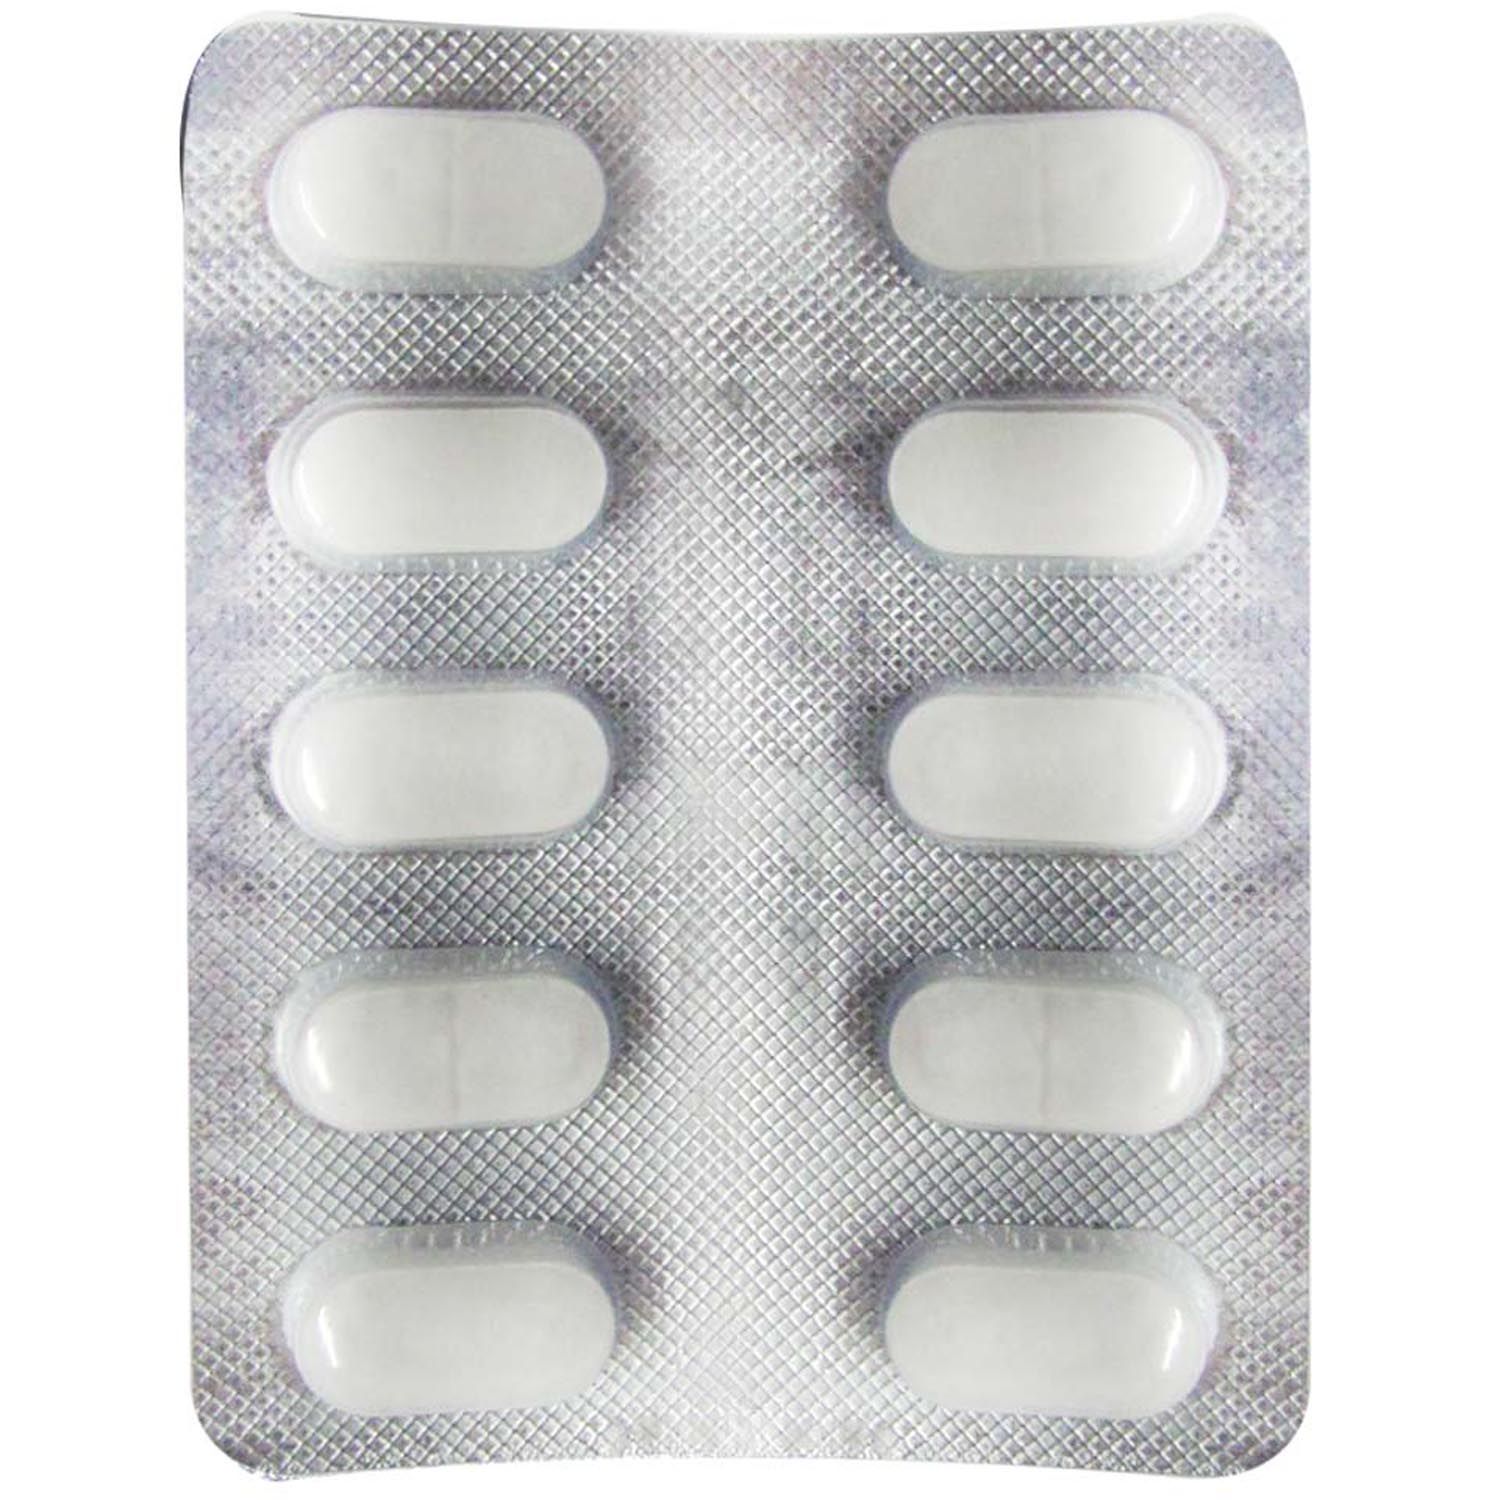 Buy Apollo Pharmacy Cold Choice Tablet 10s Online